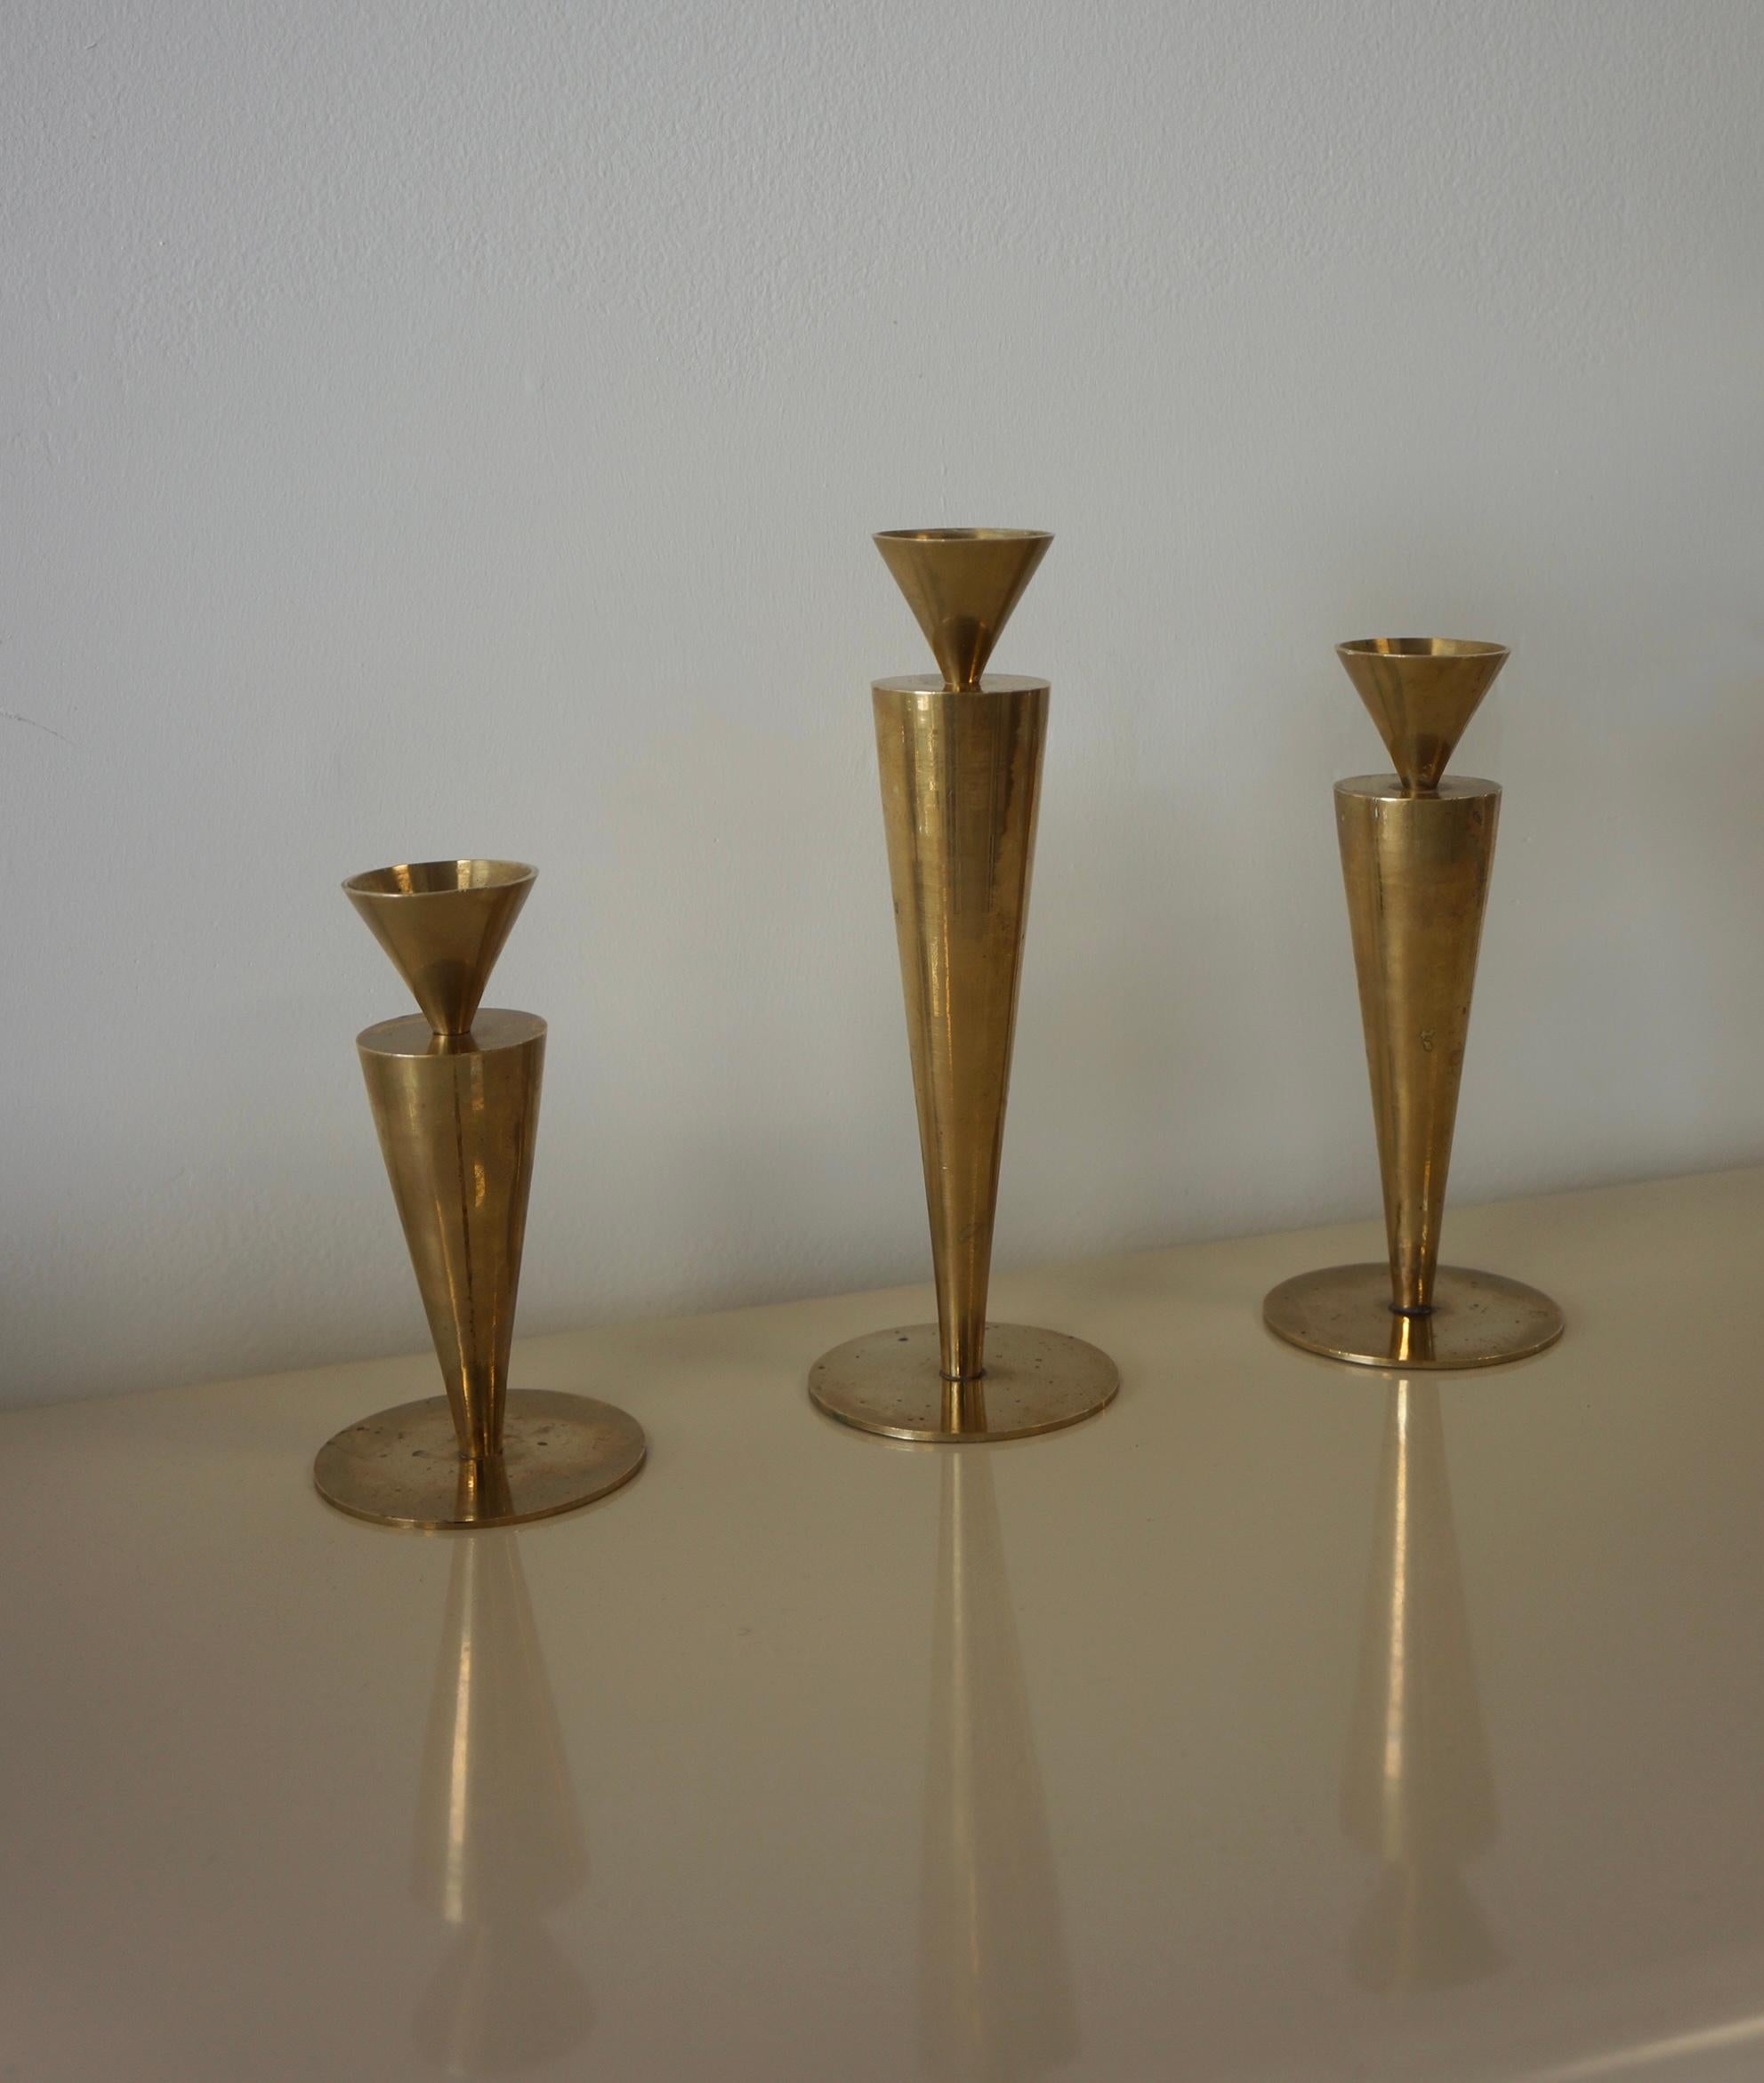 Stunning modernist style brass vintage candle holder as a set of three. Minimalistic yet elegant in design. They are made out of brass. Each piece features a triangular rounded shape mouth with an elongated triangular rounded body which sits on a